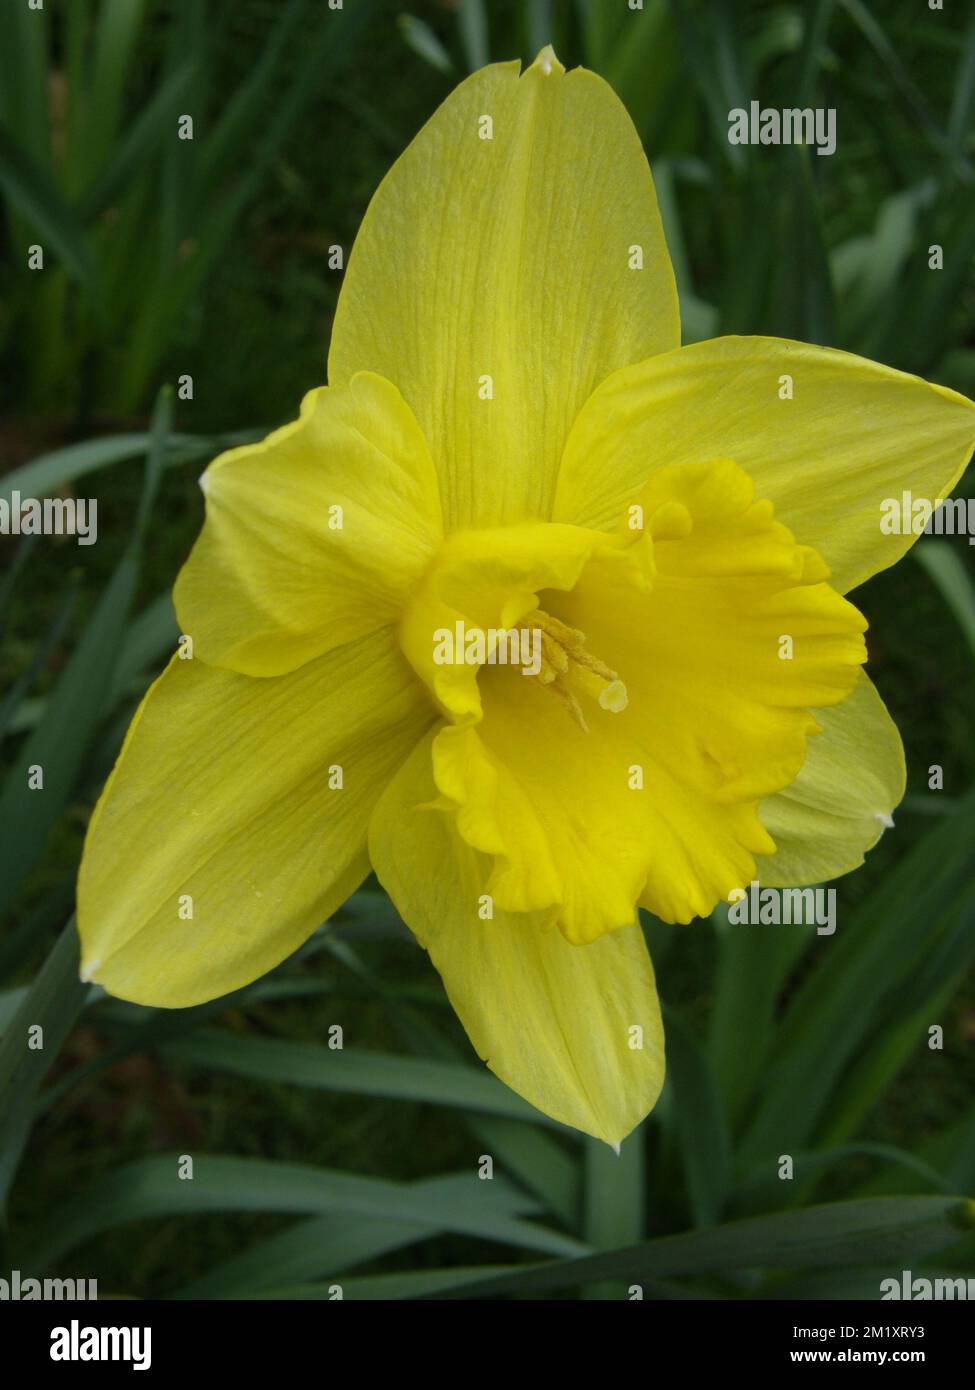 Yellow Large-Cupped daffodils (Narcissus) Carlton bloom in a garden in March Stock Photo